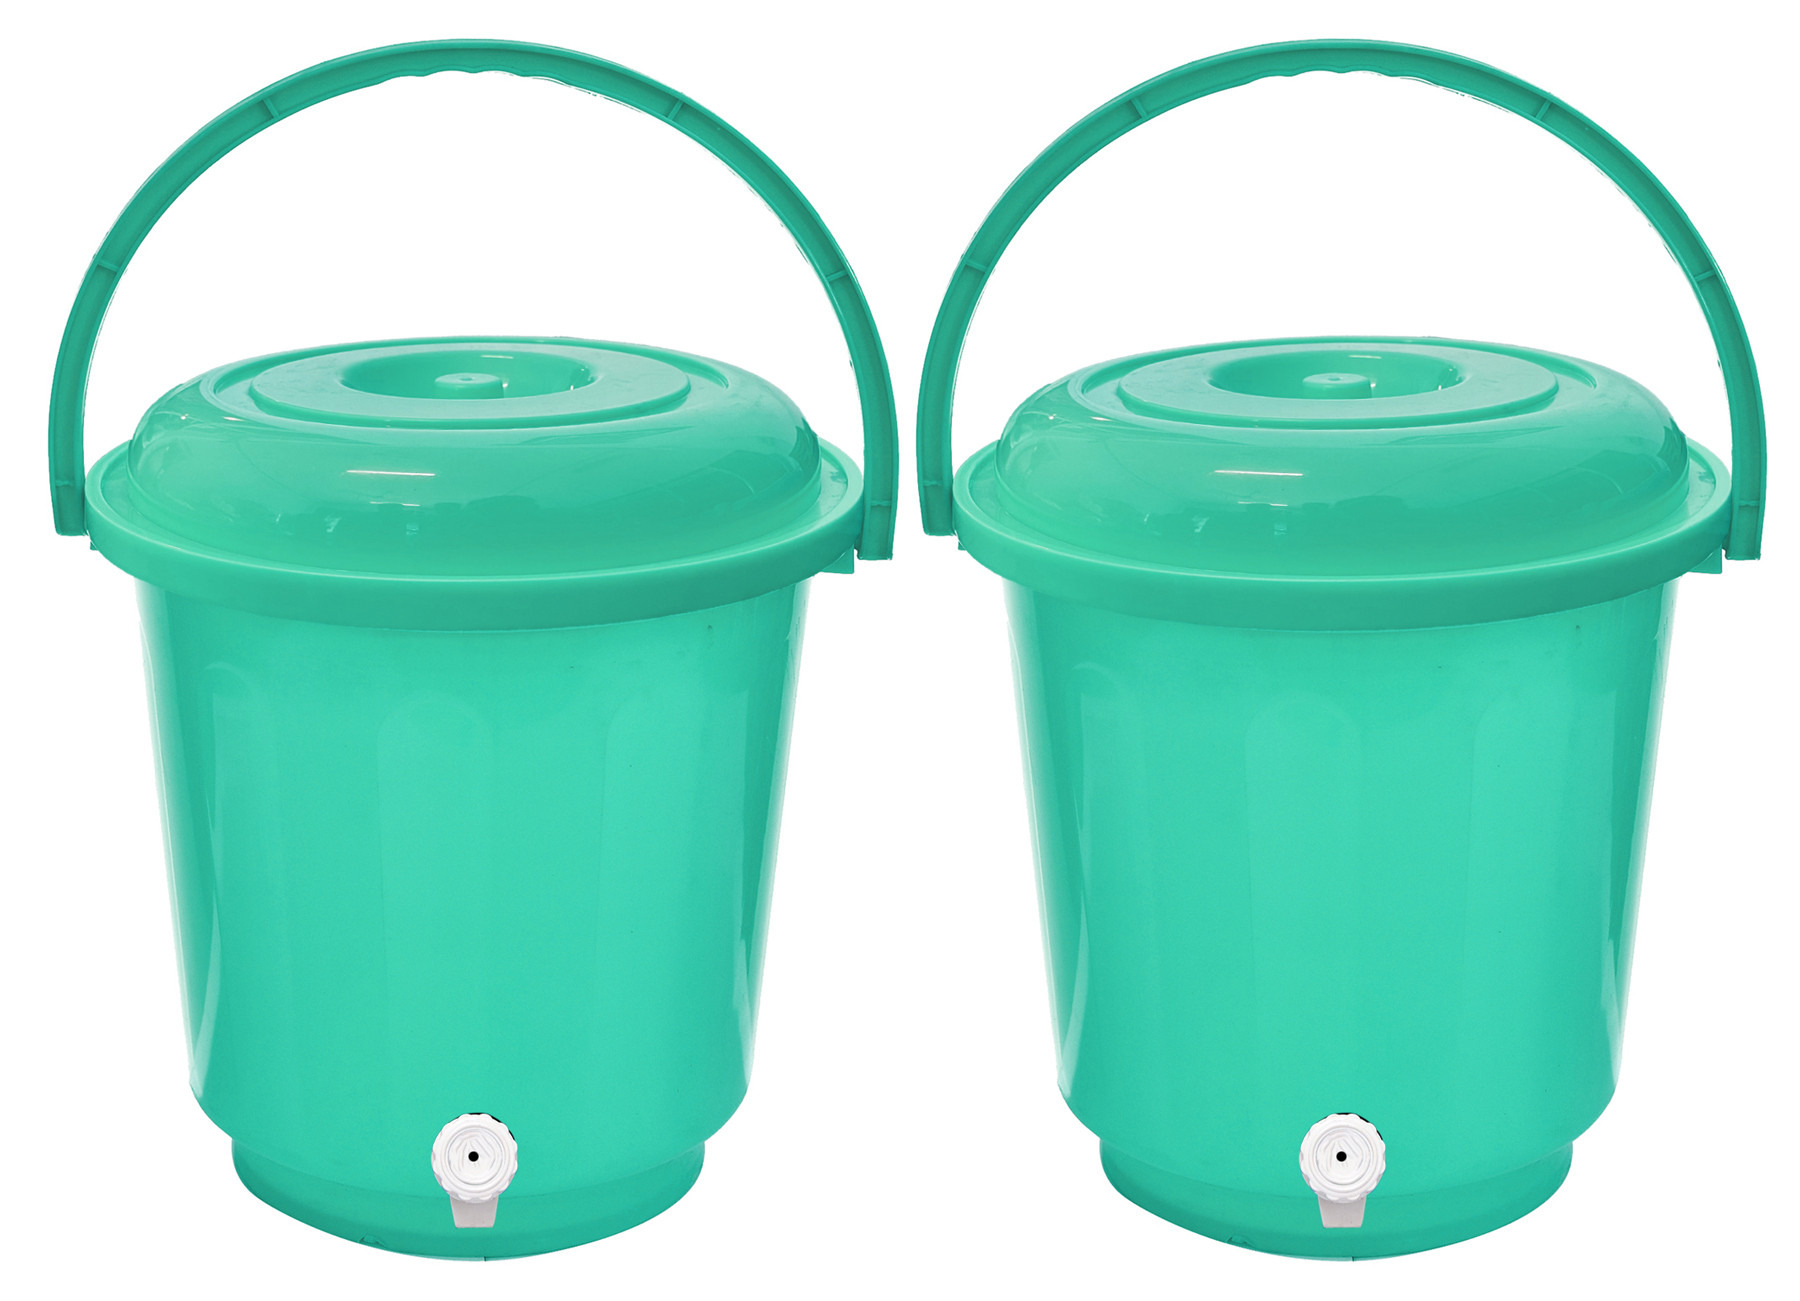 Kuber Industries Multipurposes Plastic Bucket With Lid & Tap System For Home Cleaning & Save Water, 18Ltr. (Green)